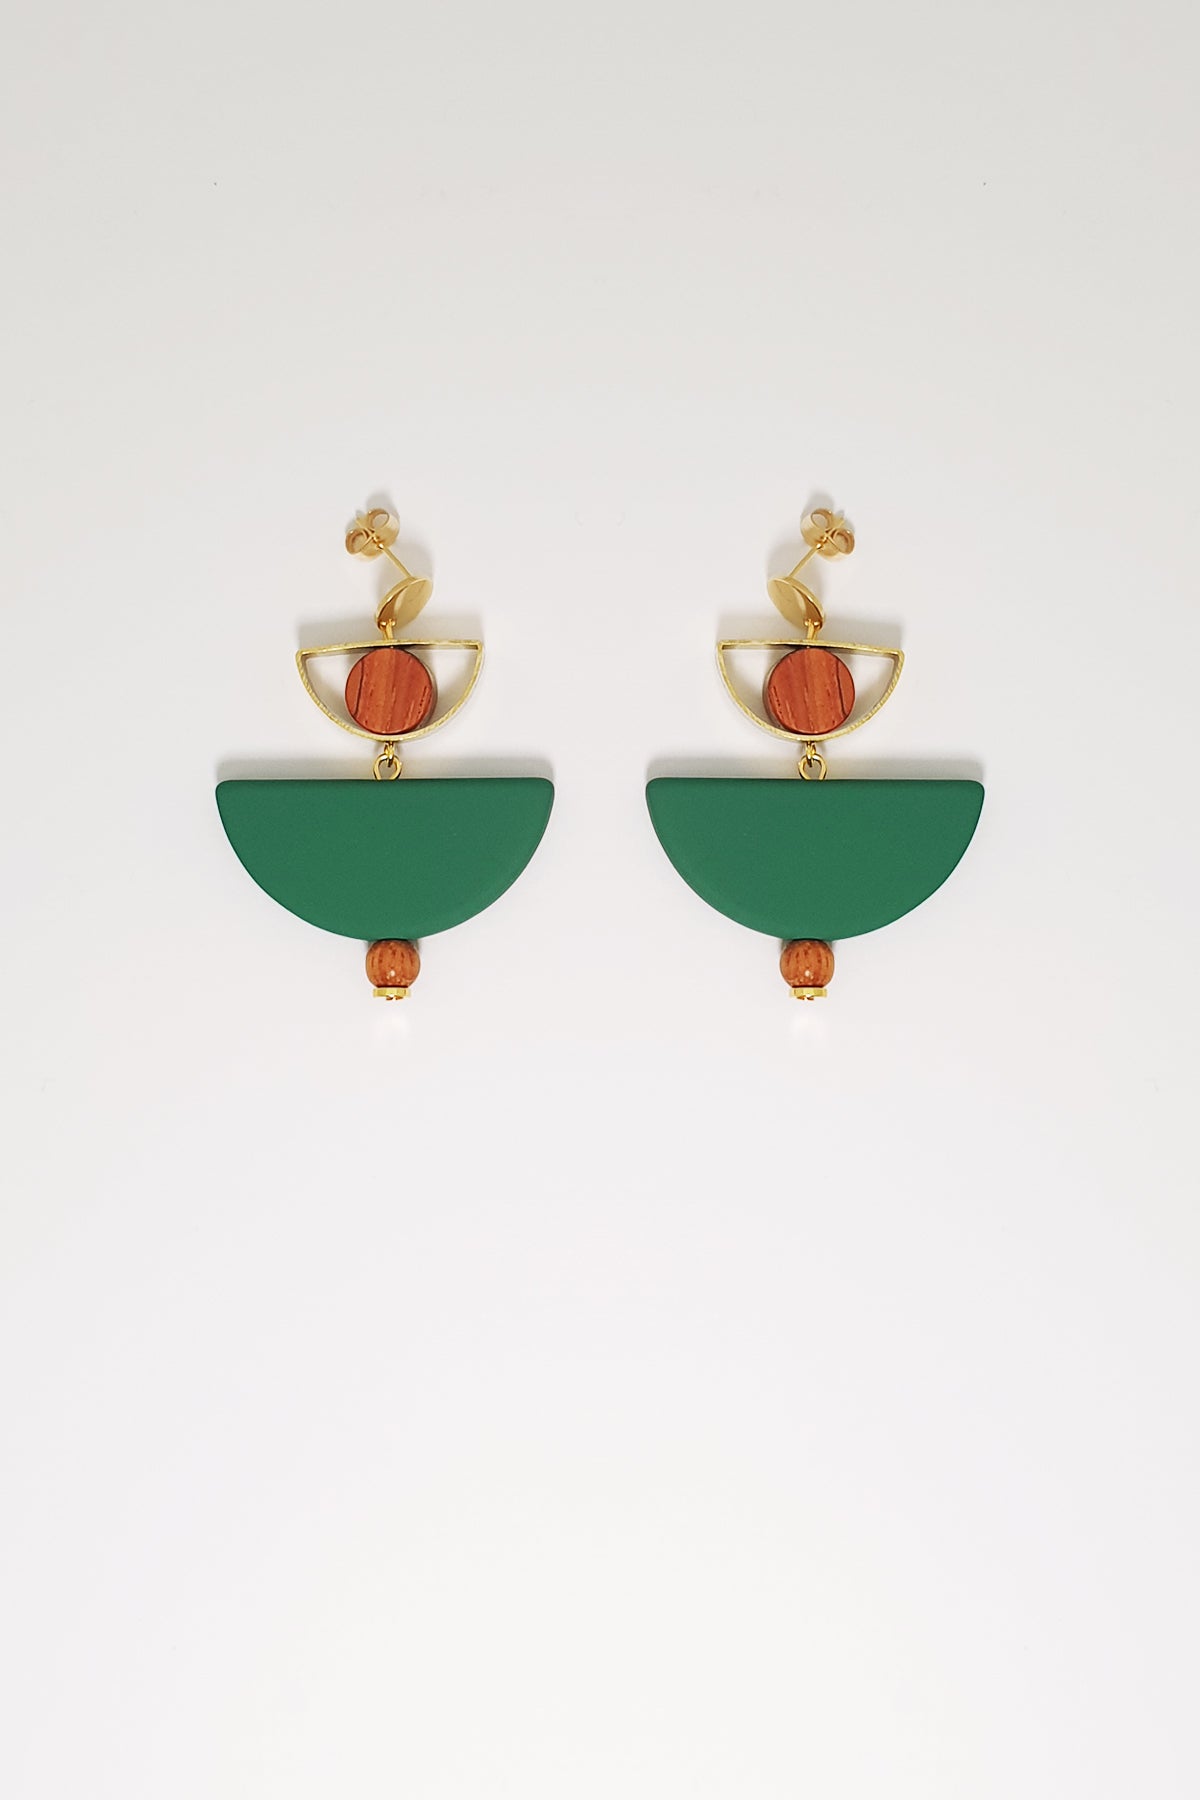 A pair of stud dangle earrings sit against a white background. They feature a small half circle brass piece with a wooden circle bead enclosed, below this hangs a green D shape bead followed by a small wooden bead and a tiny gold bead.